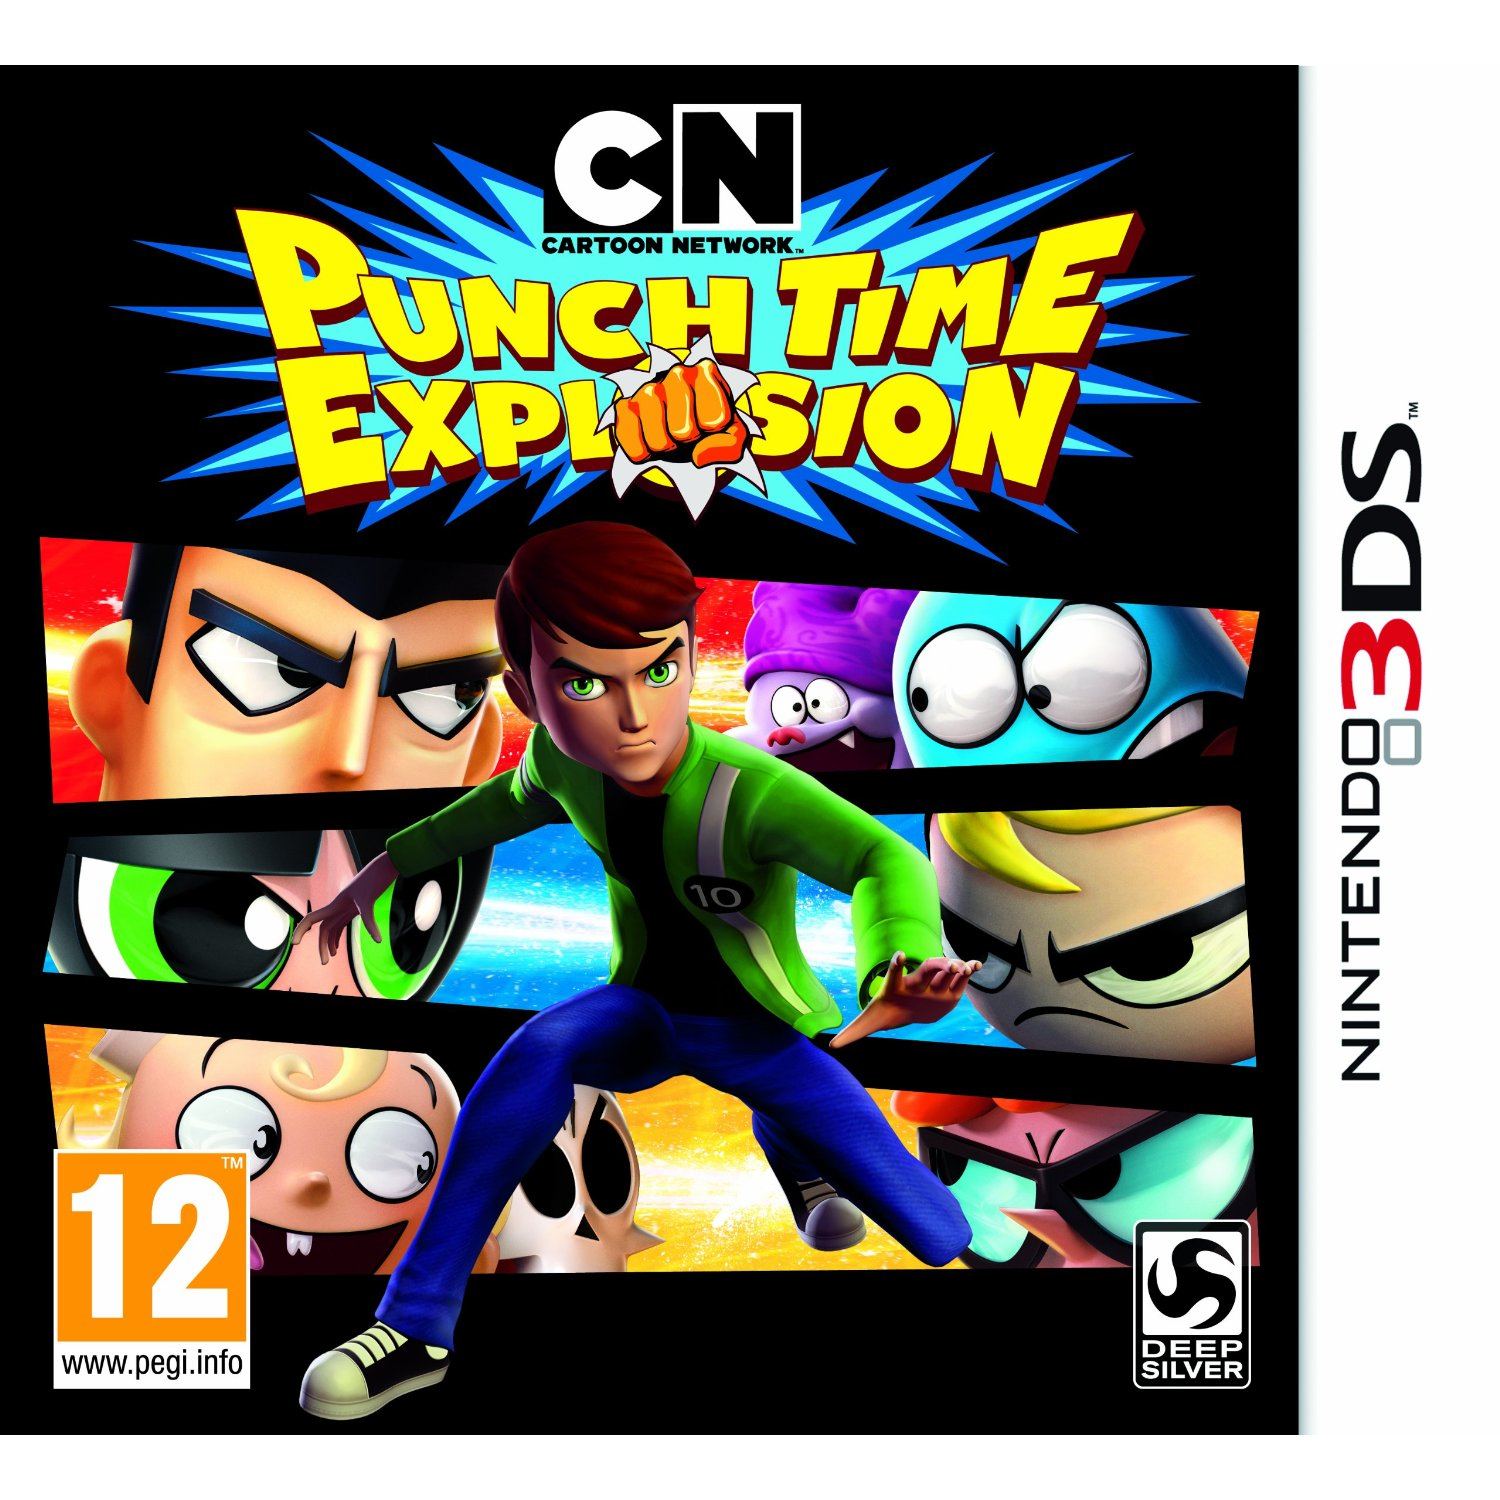  Cartoon Network: Punch Time Explosion - Nintendo 3DS (Renewed)  : Video Games